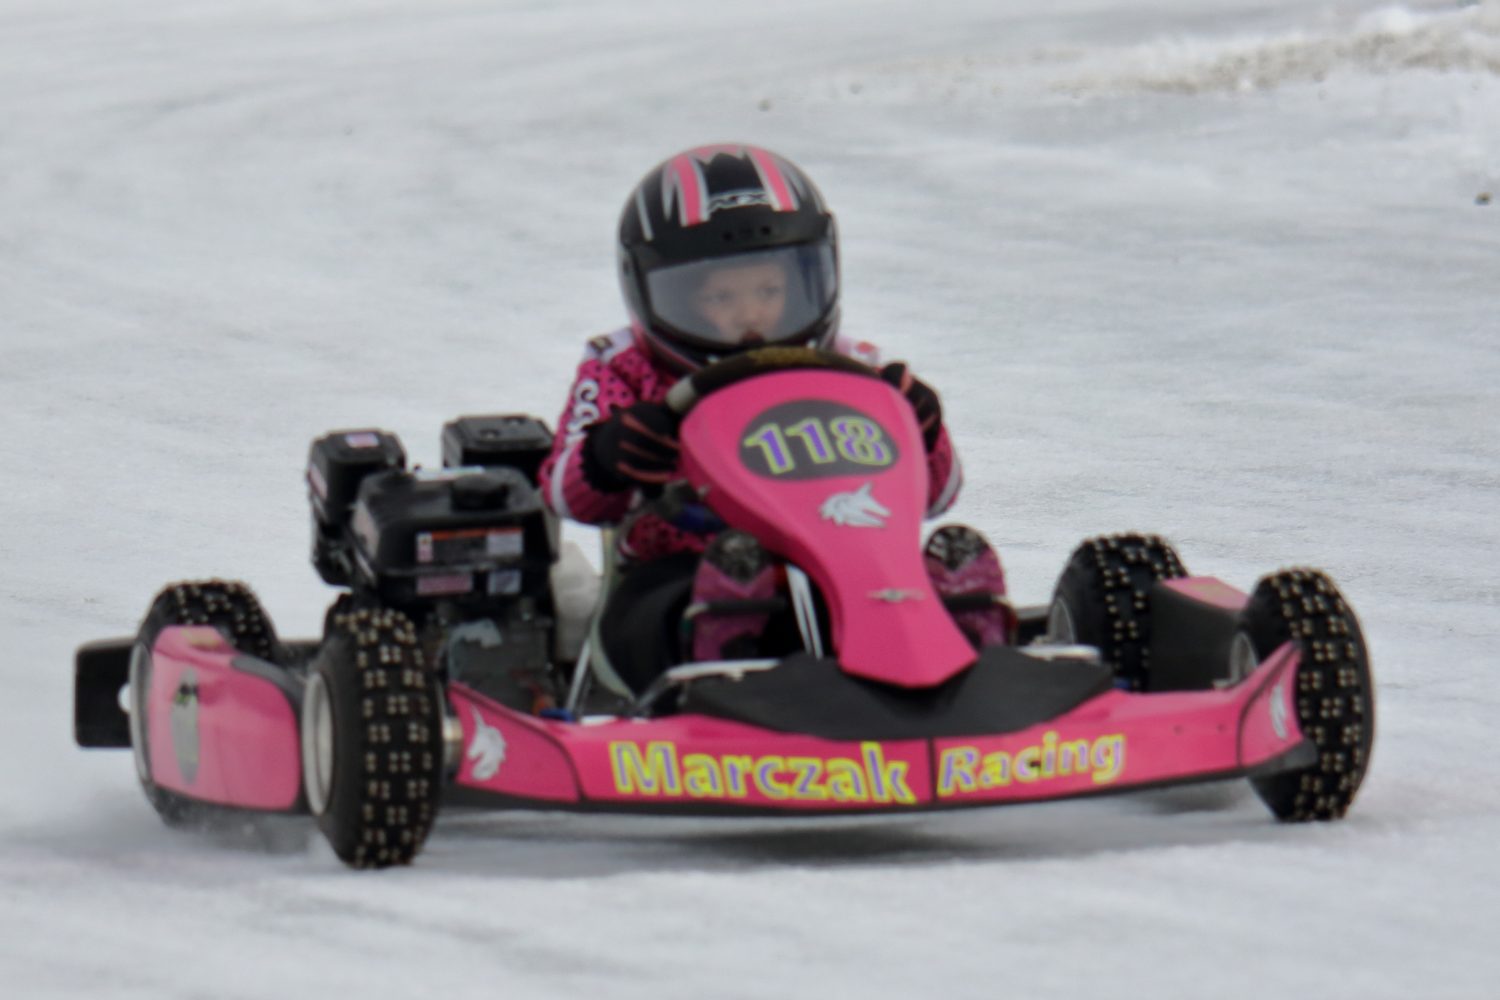 Gleason Ice Oval Races rev things up in January